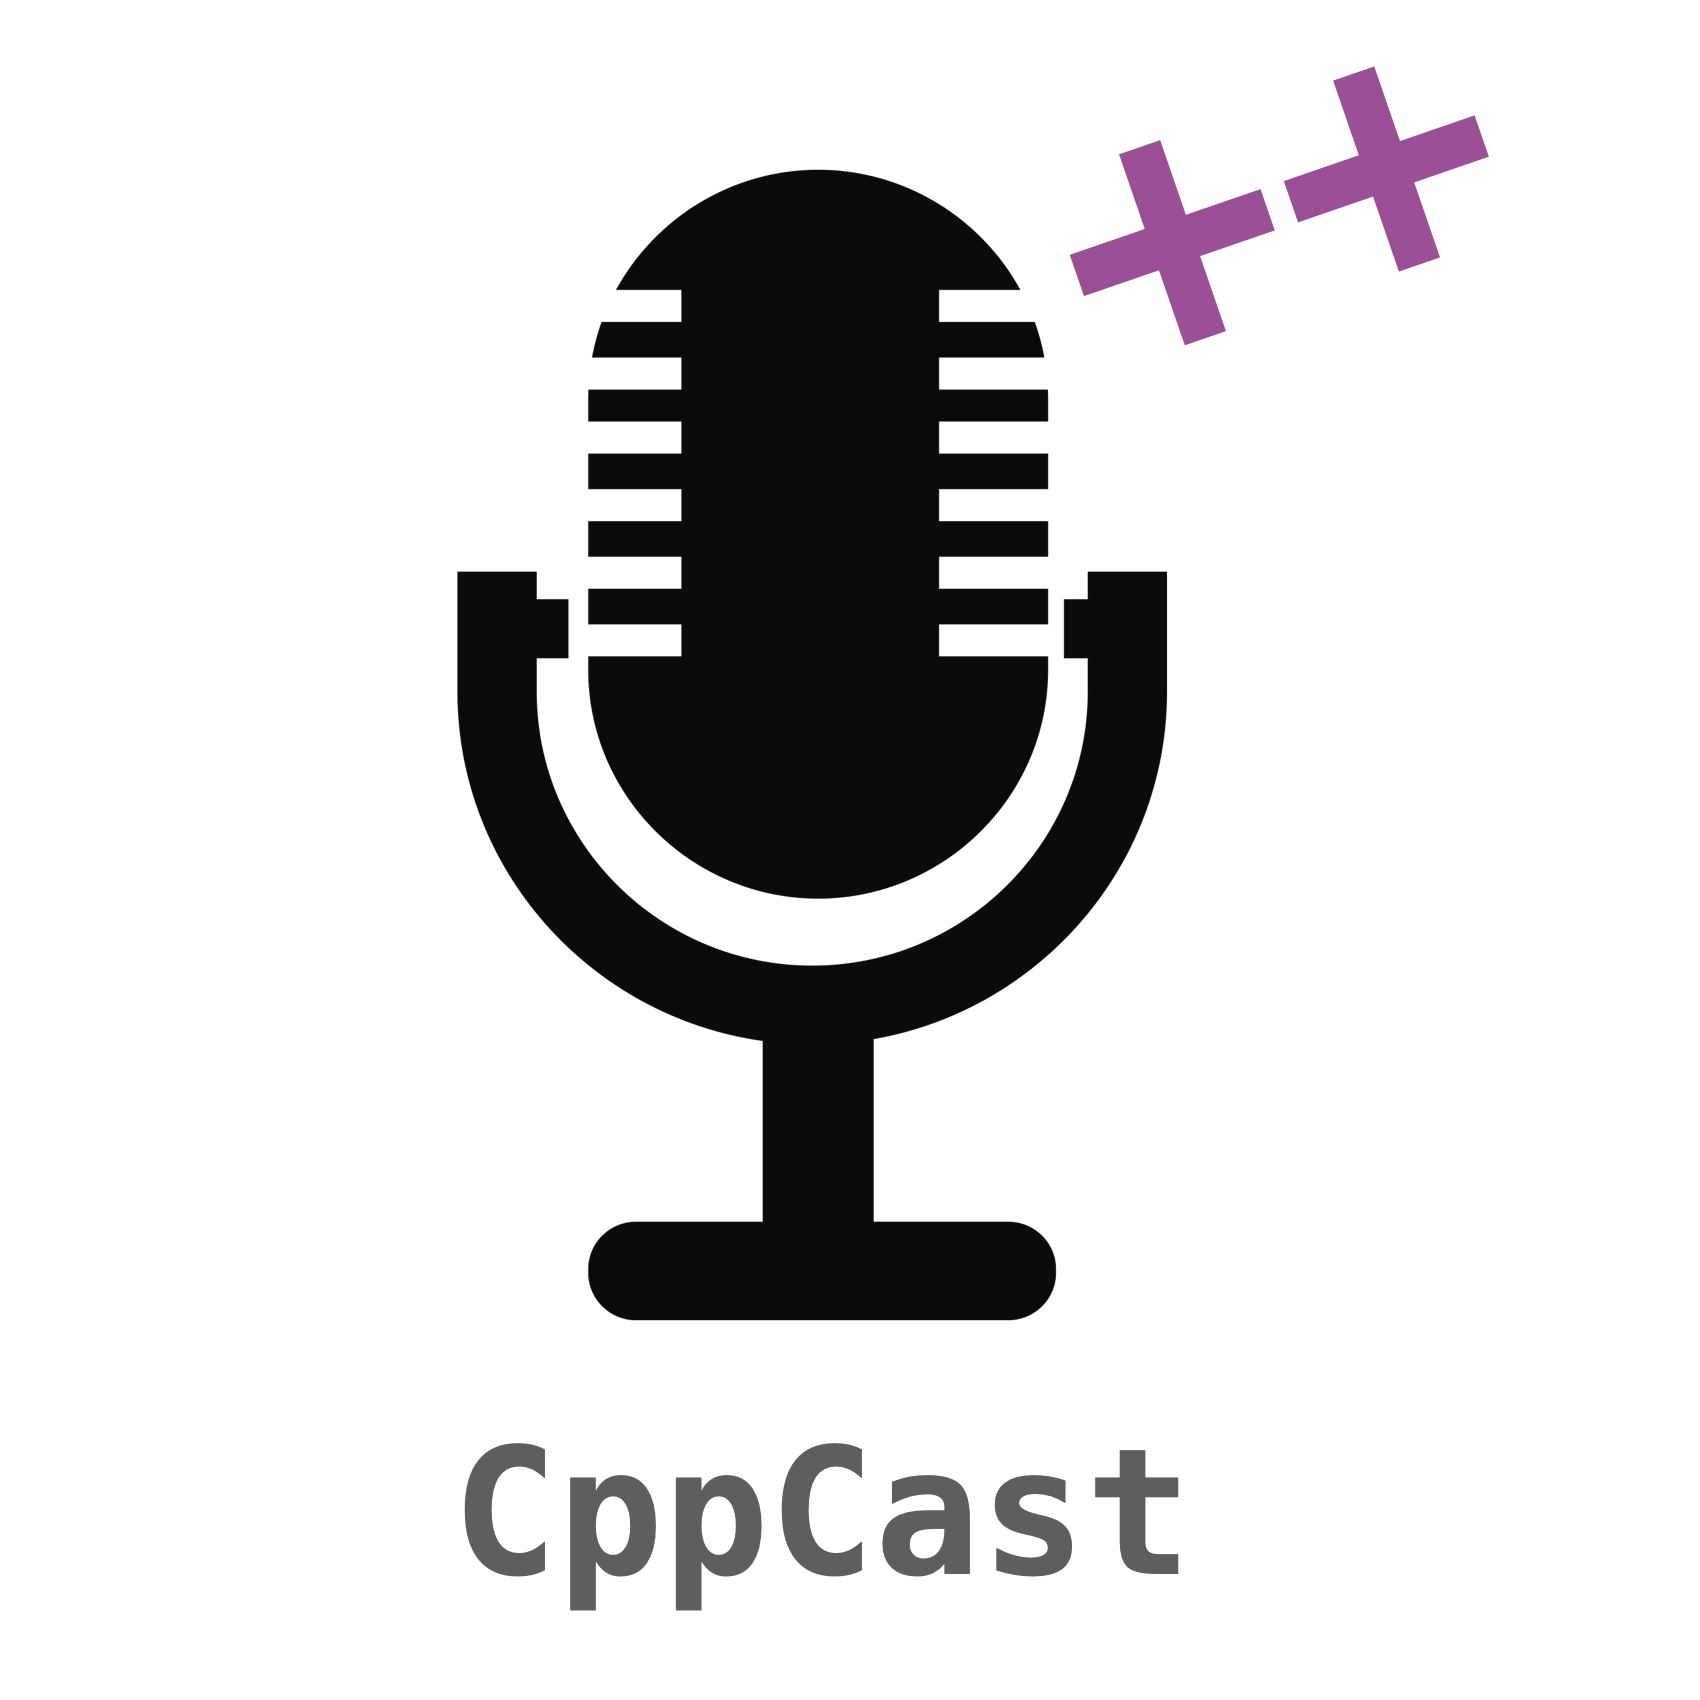 CppCast